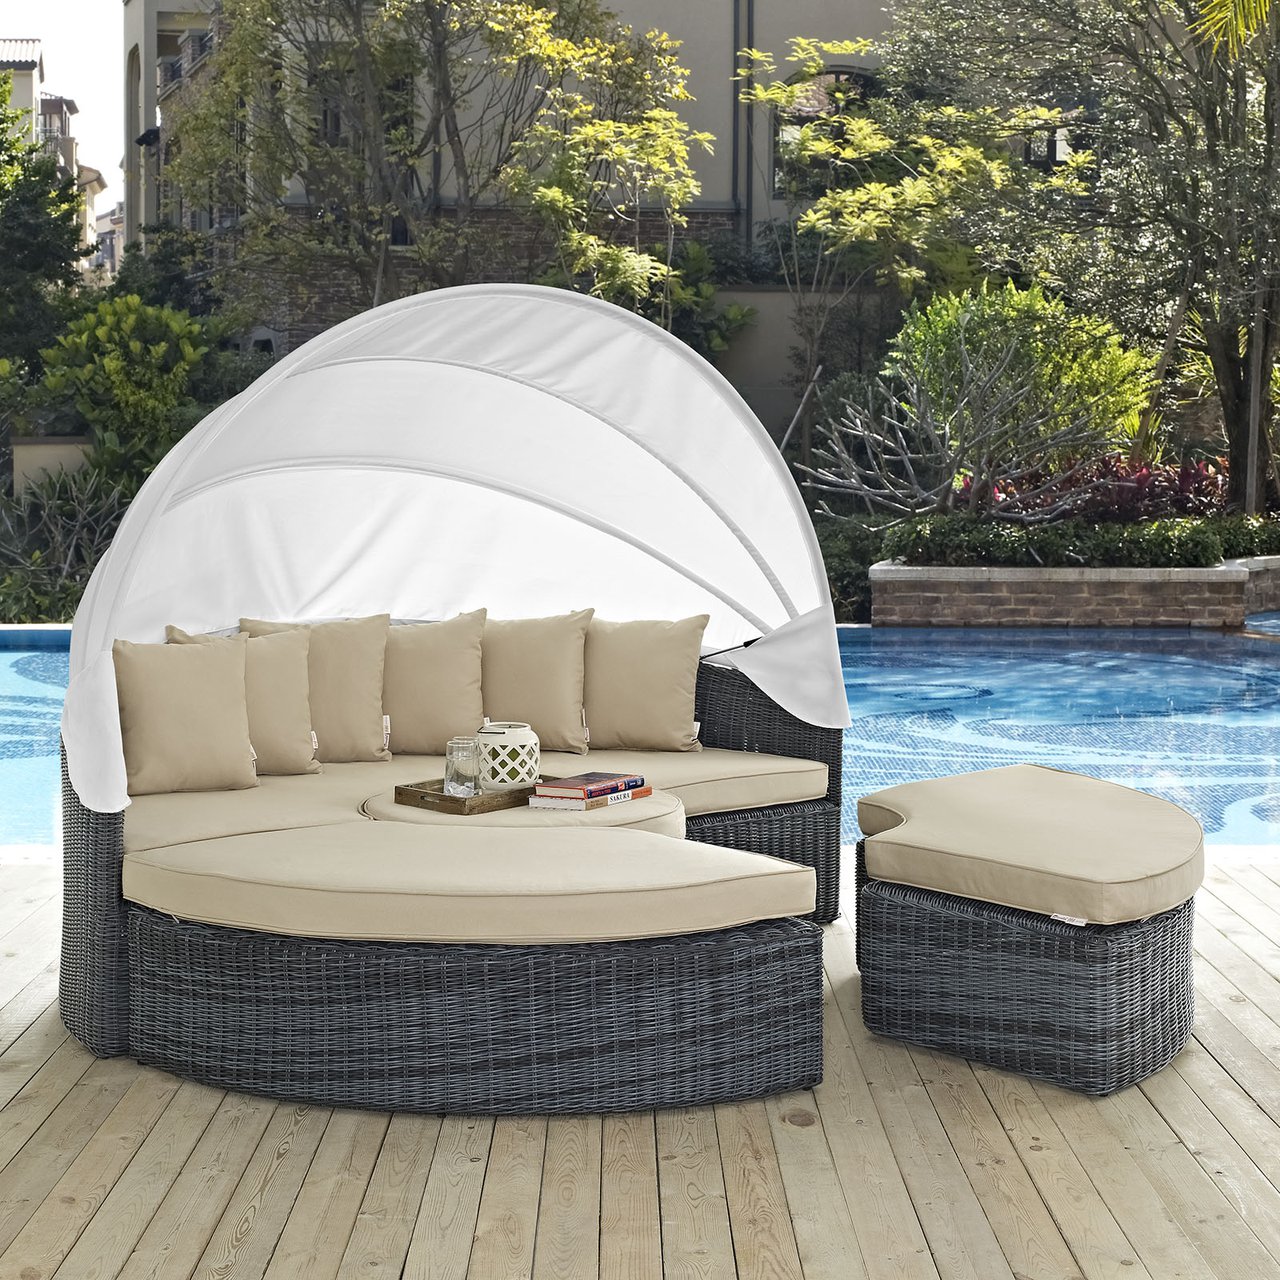 M&W Outdoor Funiture Round Patio Daybed with Retractable Canopy